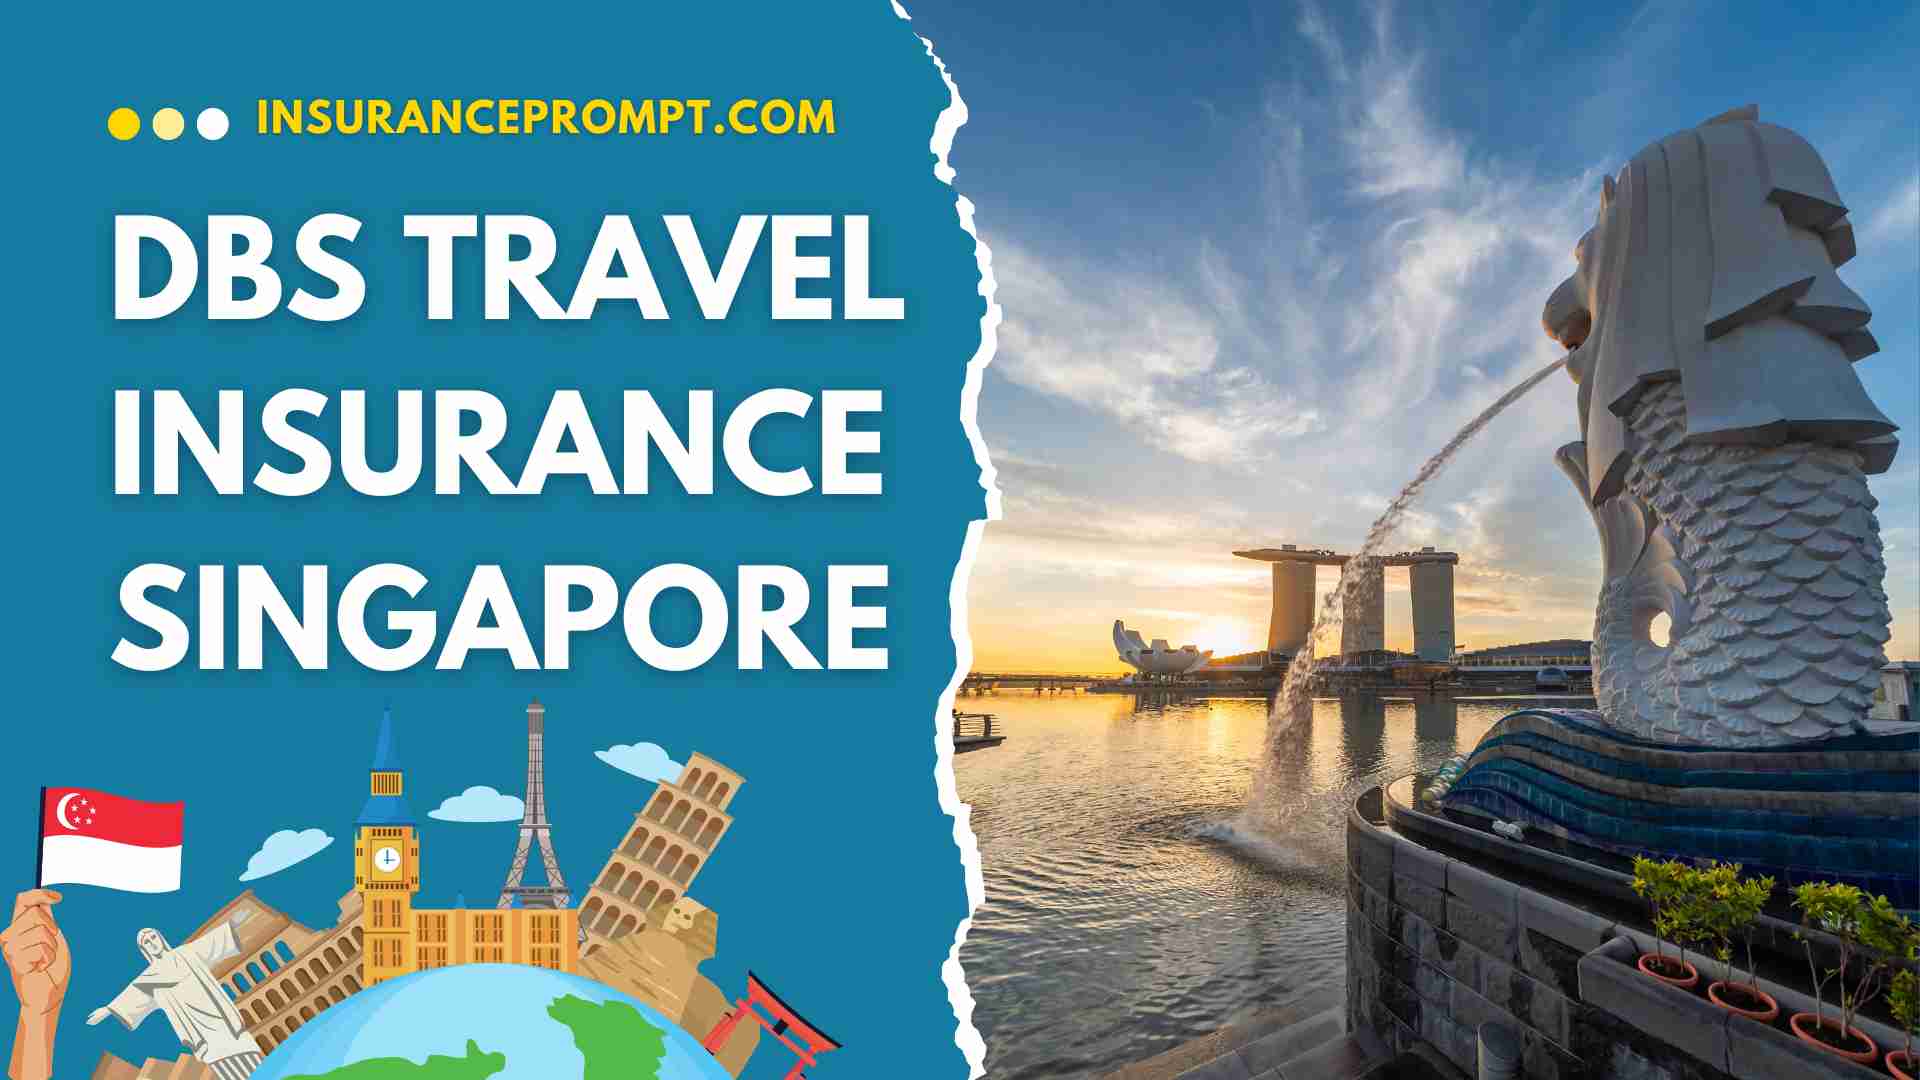 DBS Travel Insurance Singapore: Secure Your Trip with Chubb